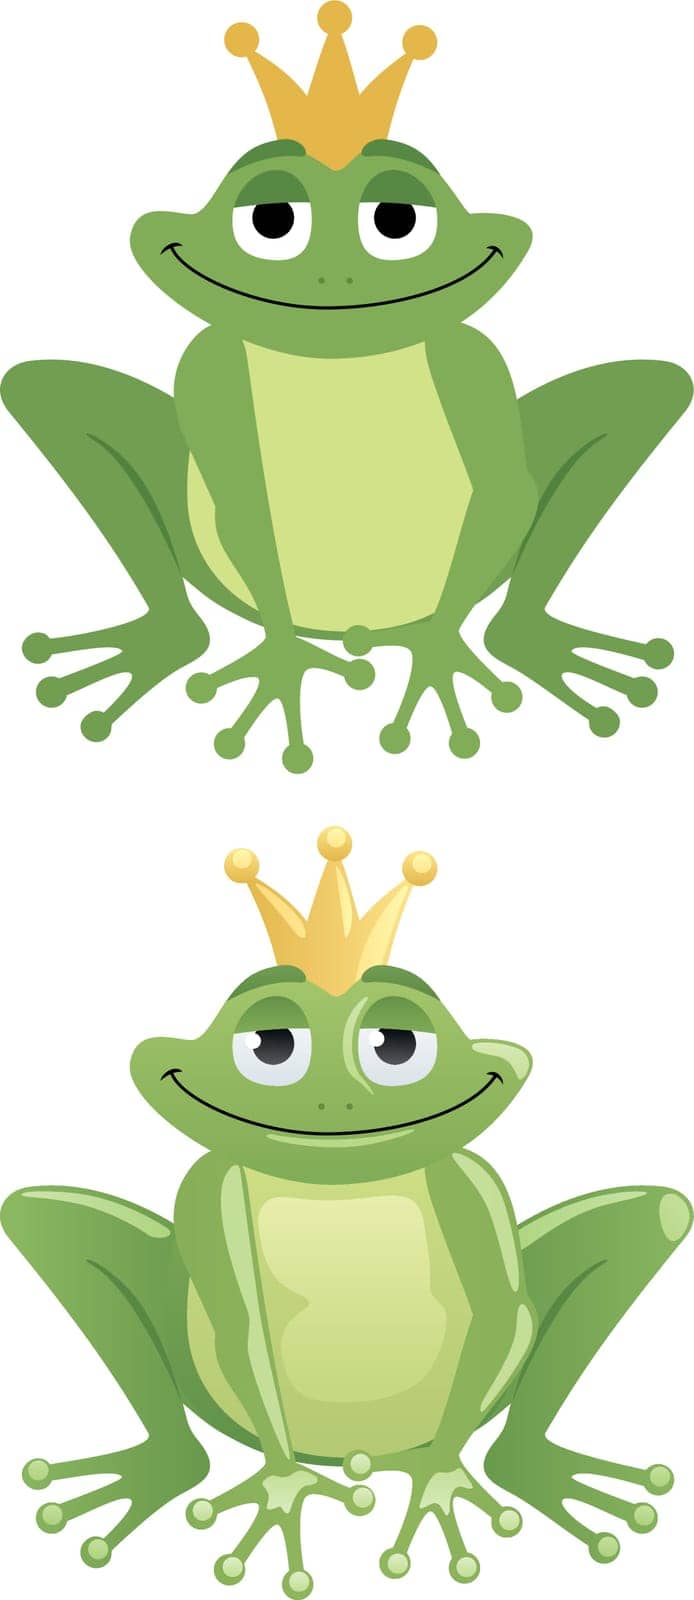 Frog Prince in two versions: One with gradients and one without.